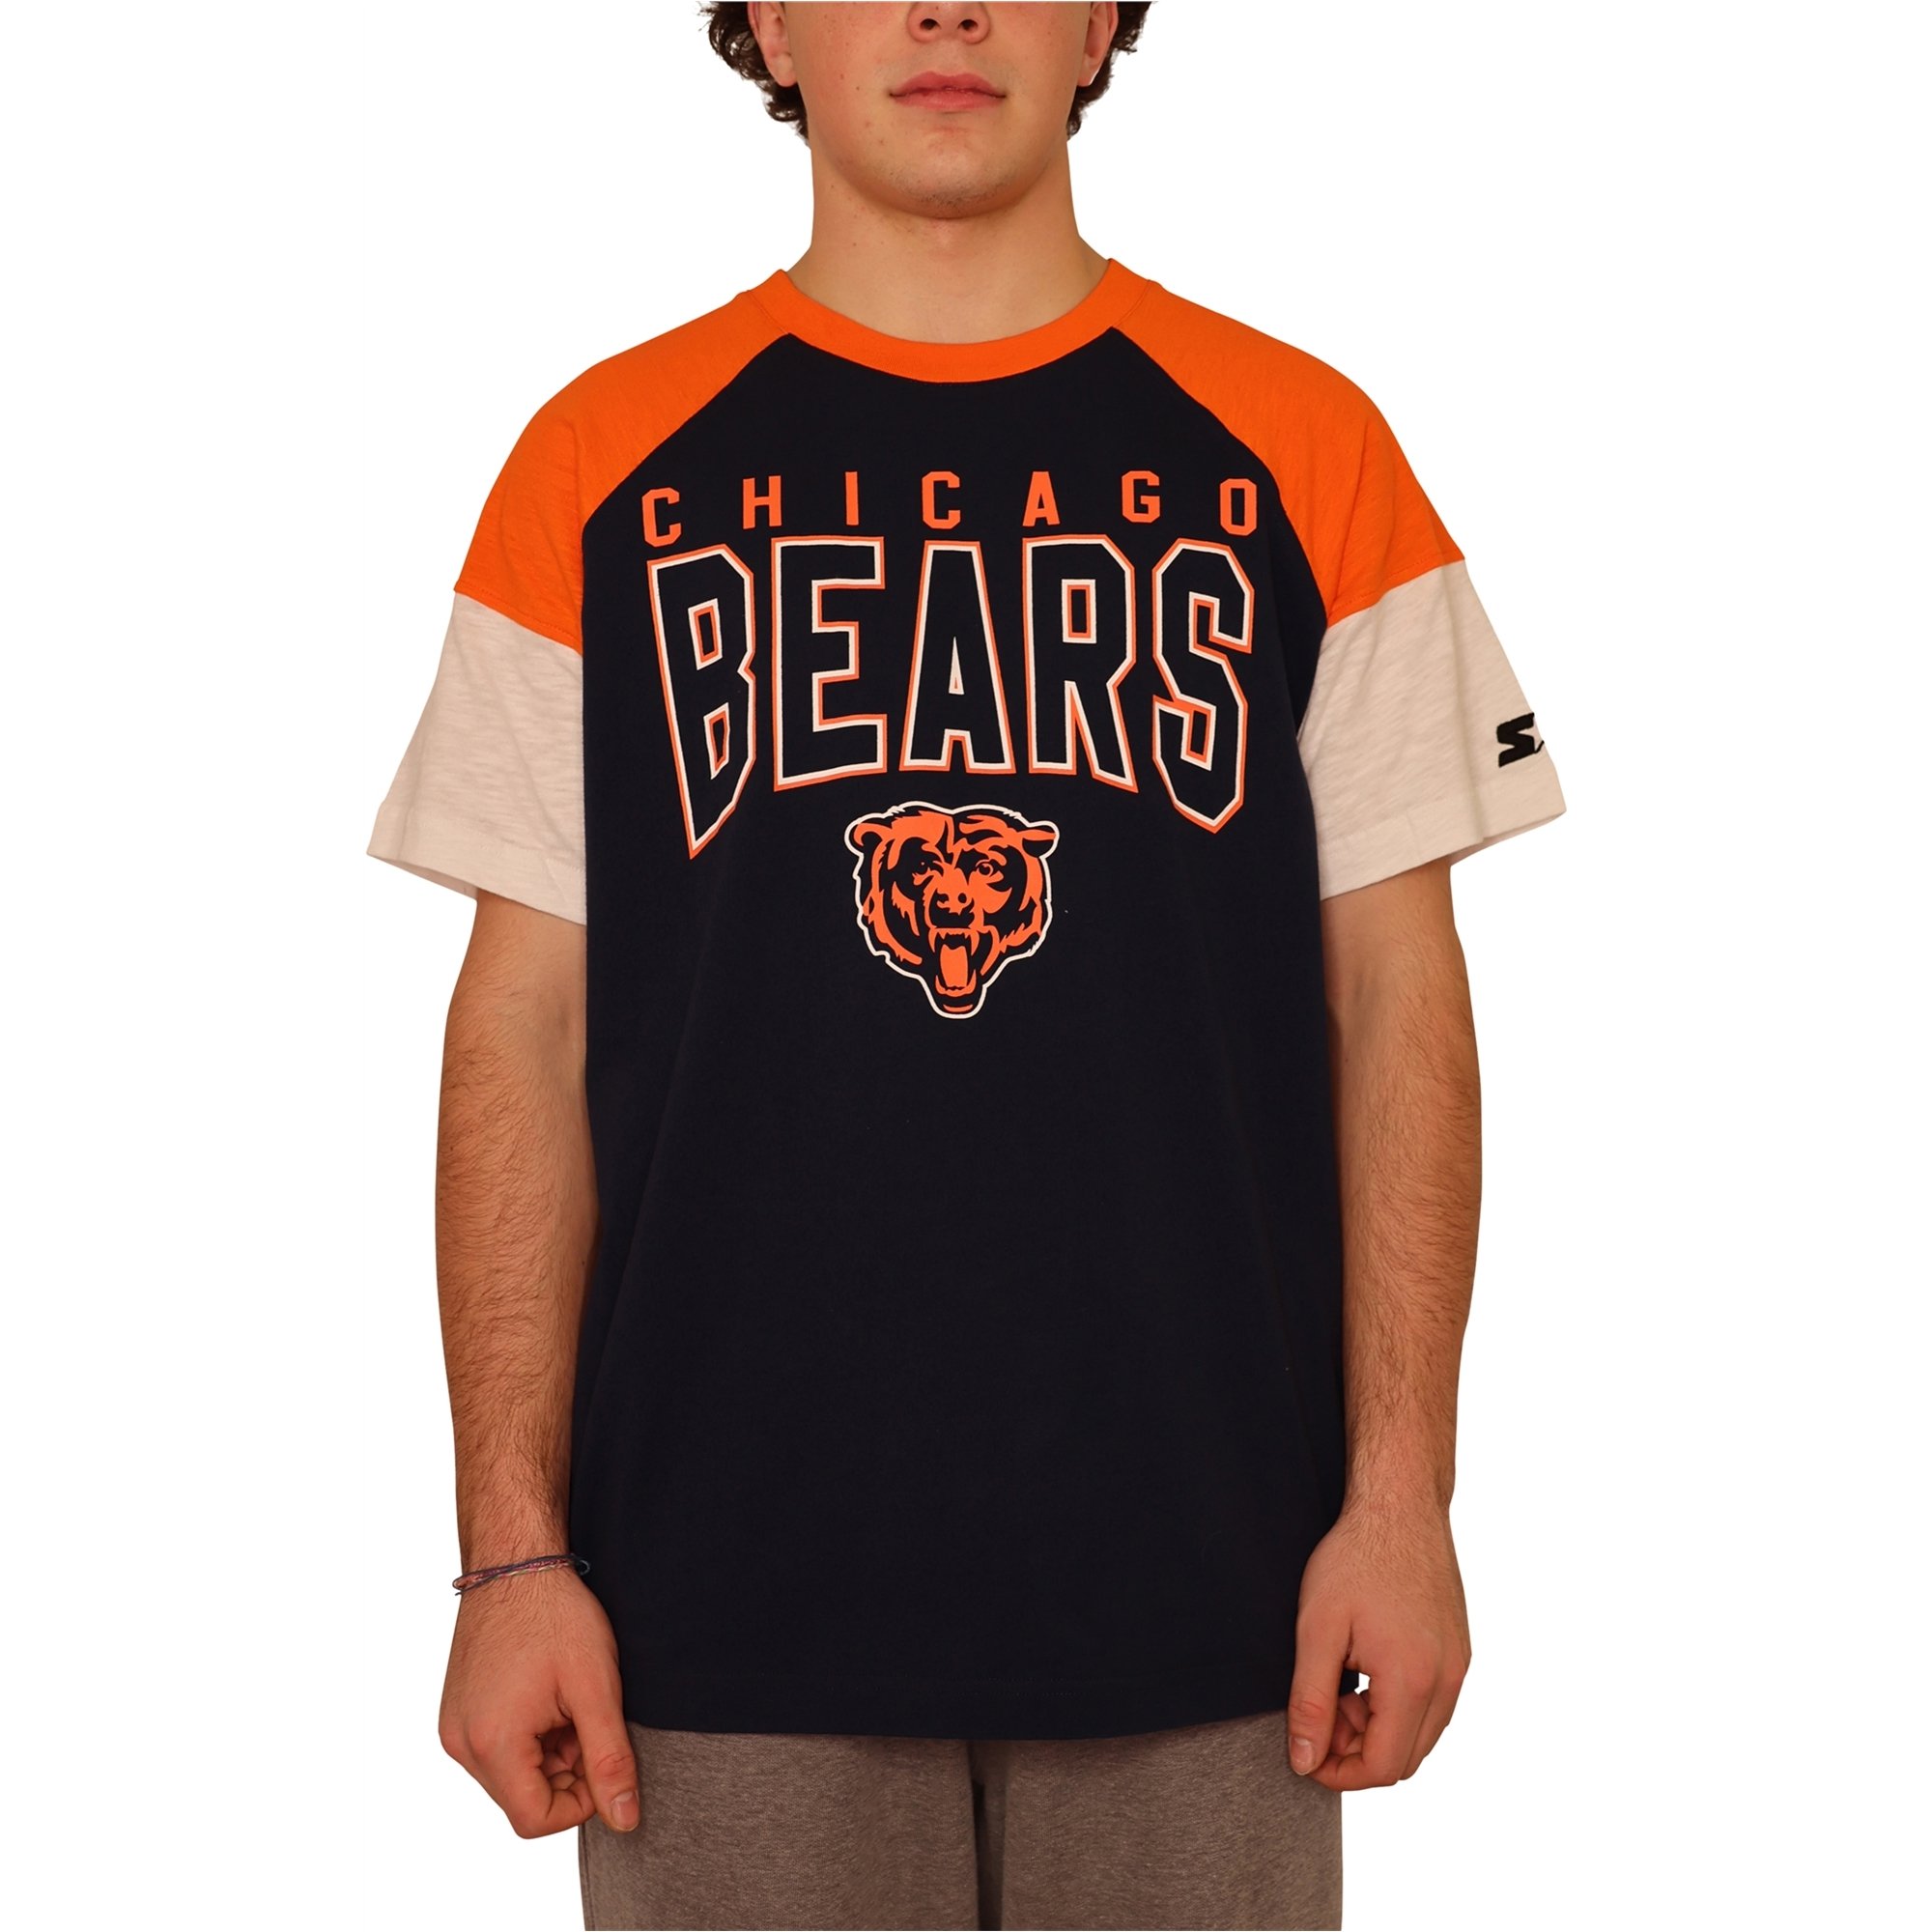 NFL Mens Chicago Bears Graphic T-Shirt, Blue, Large